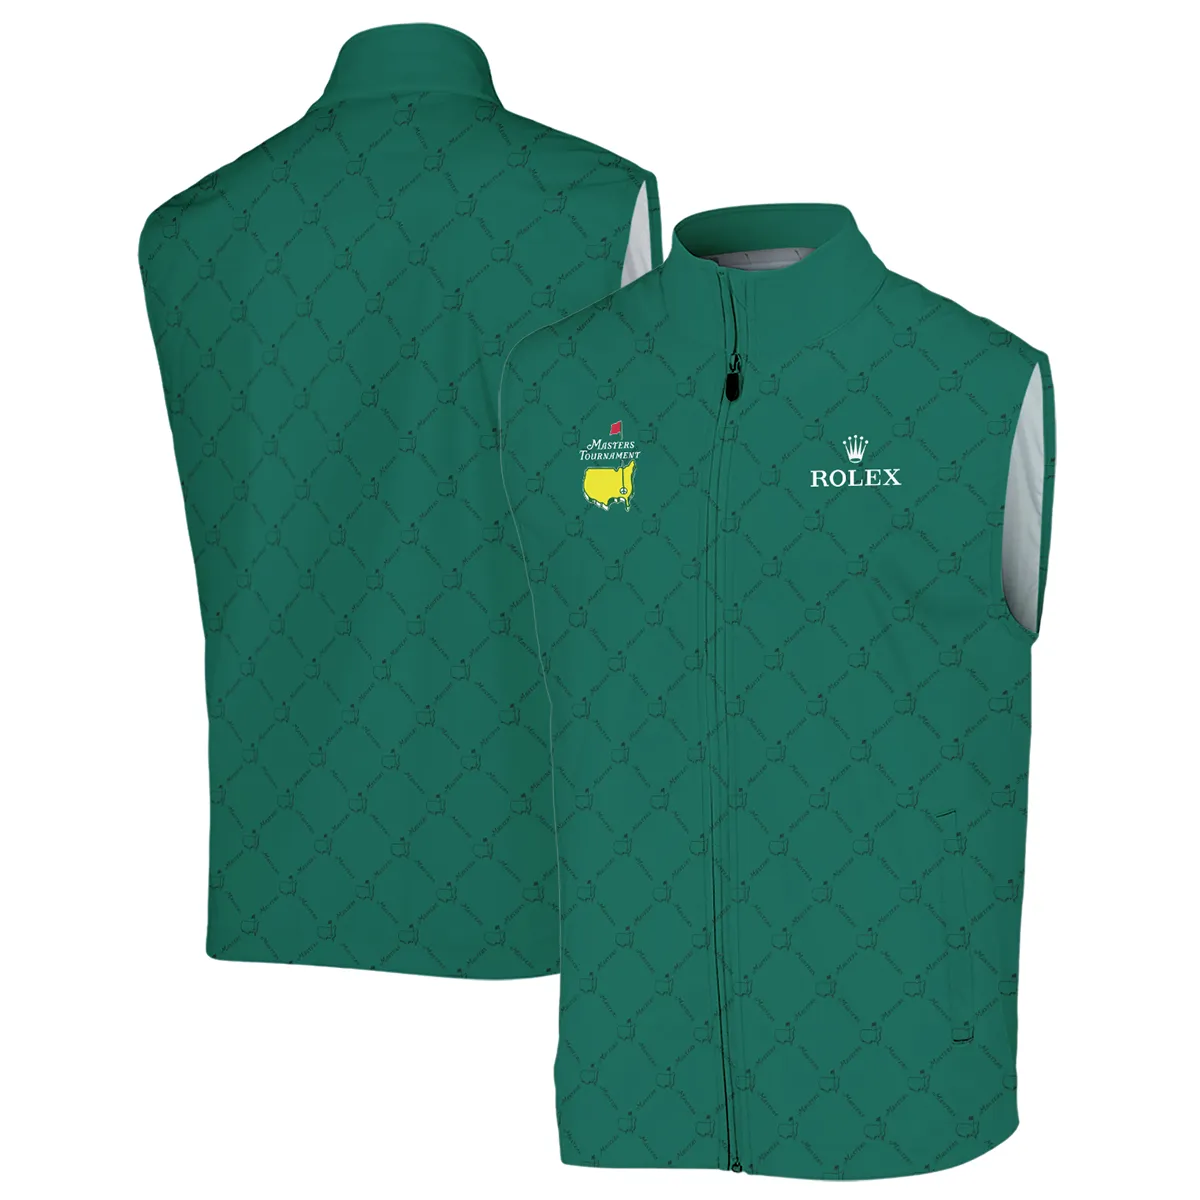 Golf Sport Pattern Color Green Mix Black Masters Tournament Rolex Sleeveless Jacket Style Classic